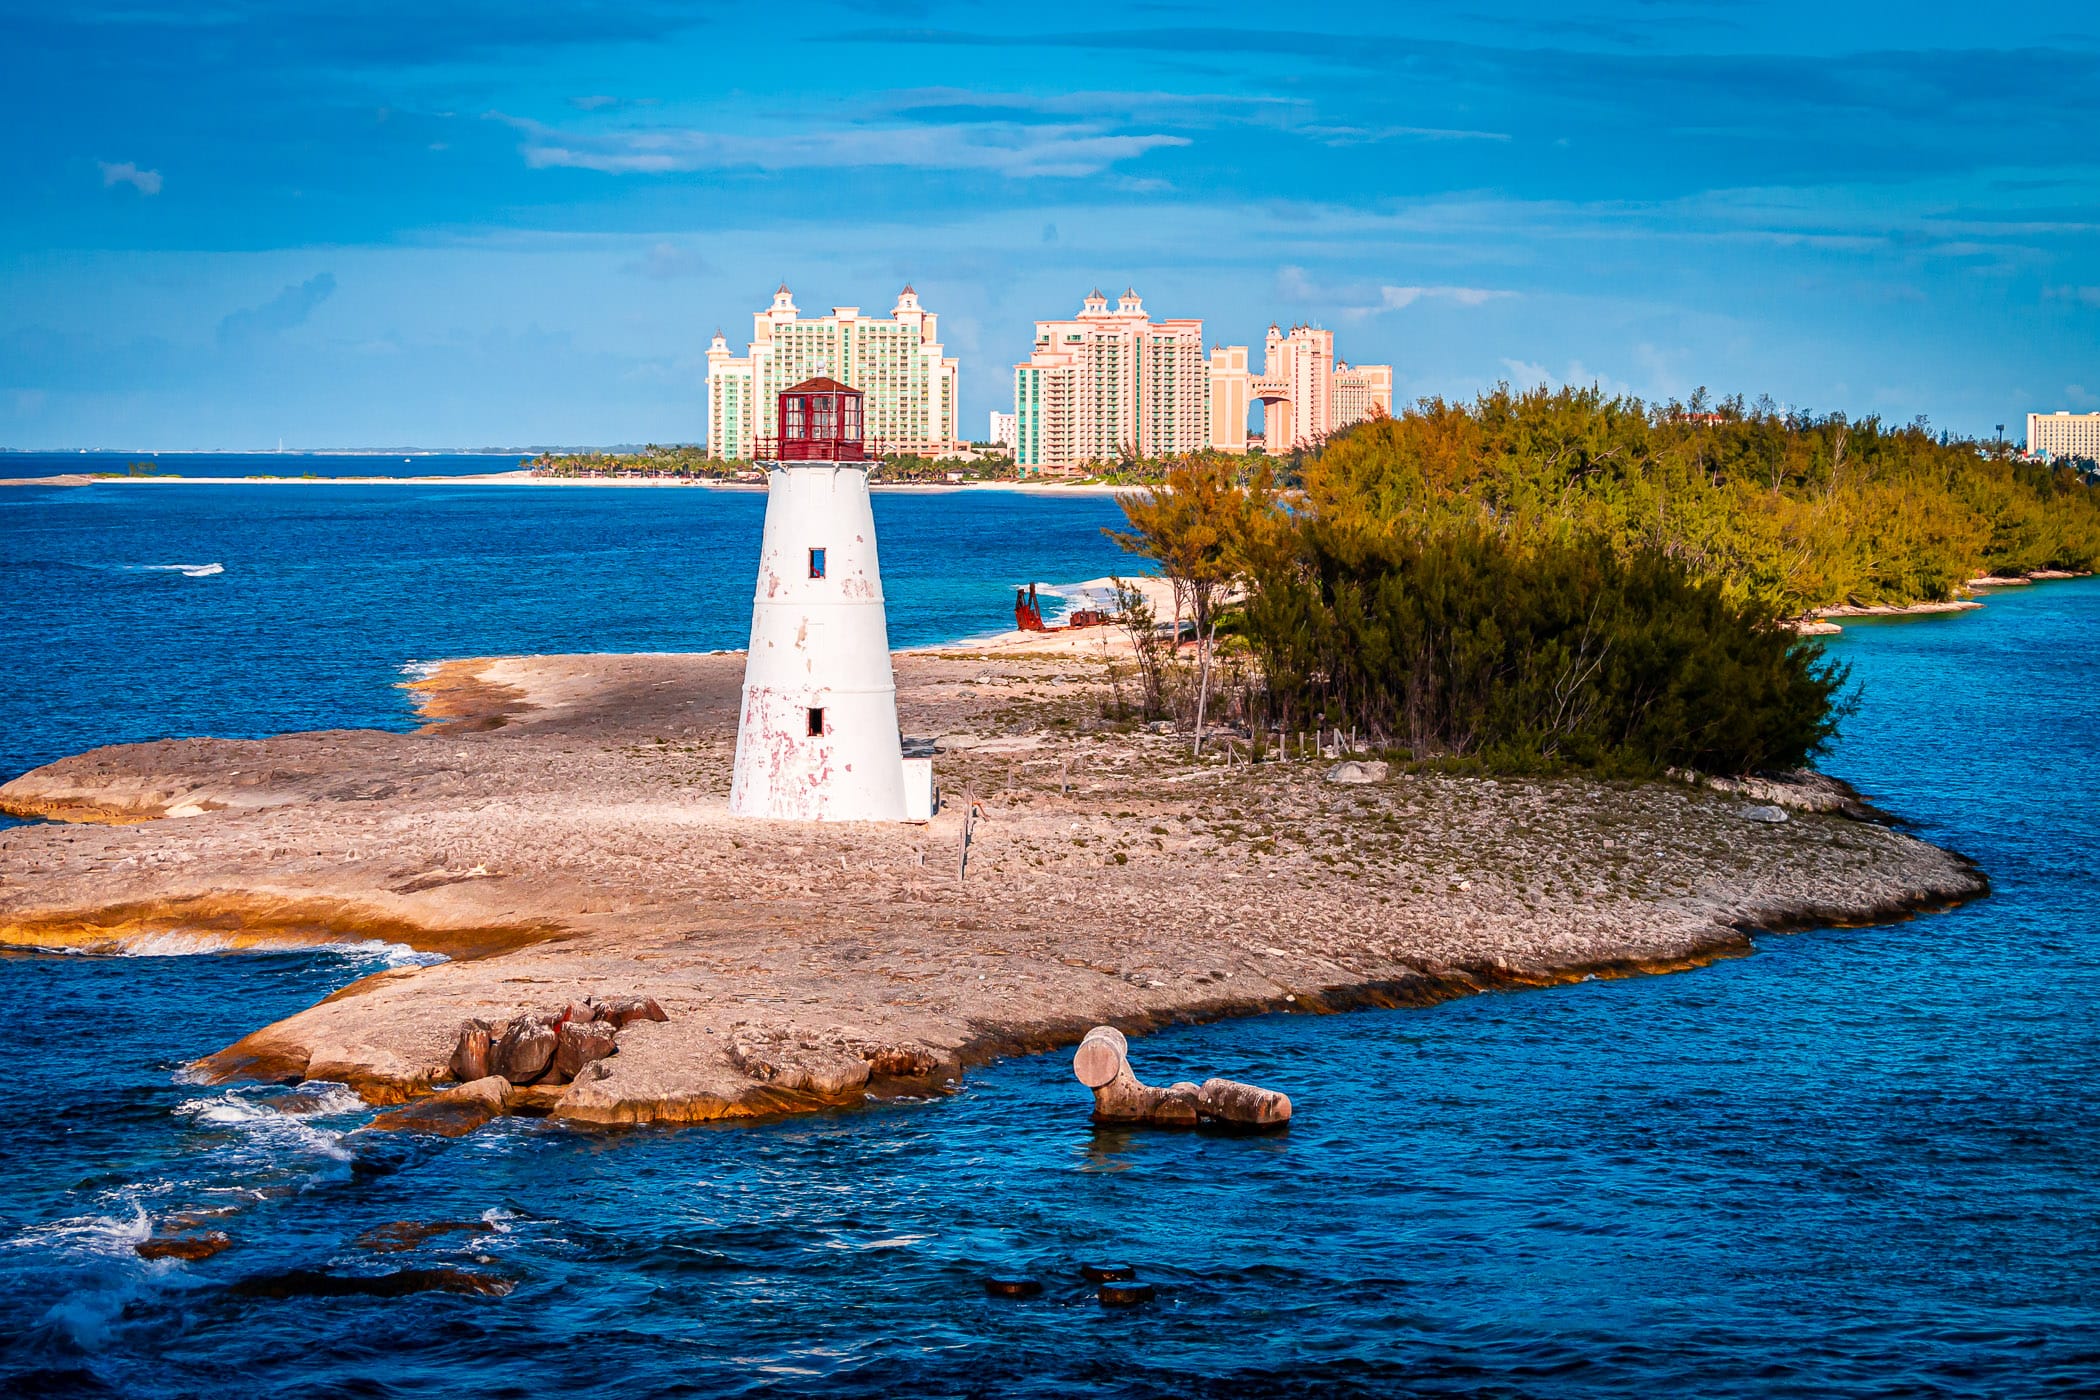 The Nassau Harbour Lighthouse sits abandoned on the western end of Colonial Beach as the Atlantis mega-resort rises in the background.